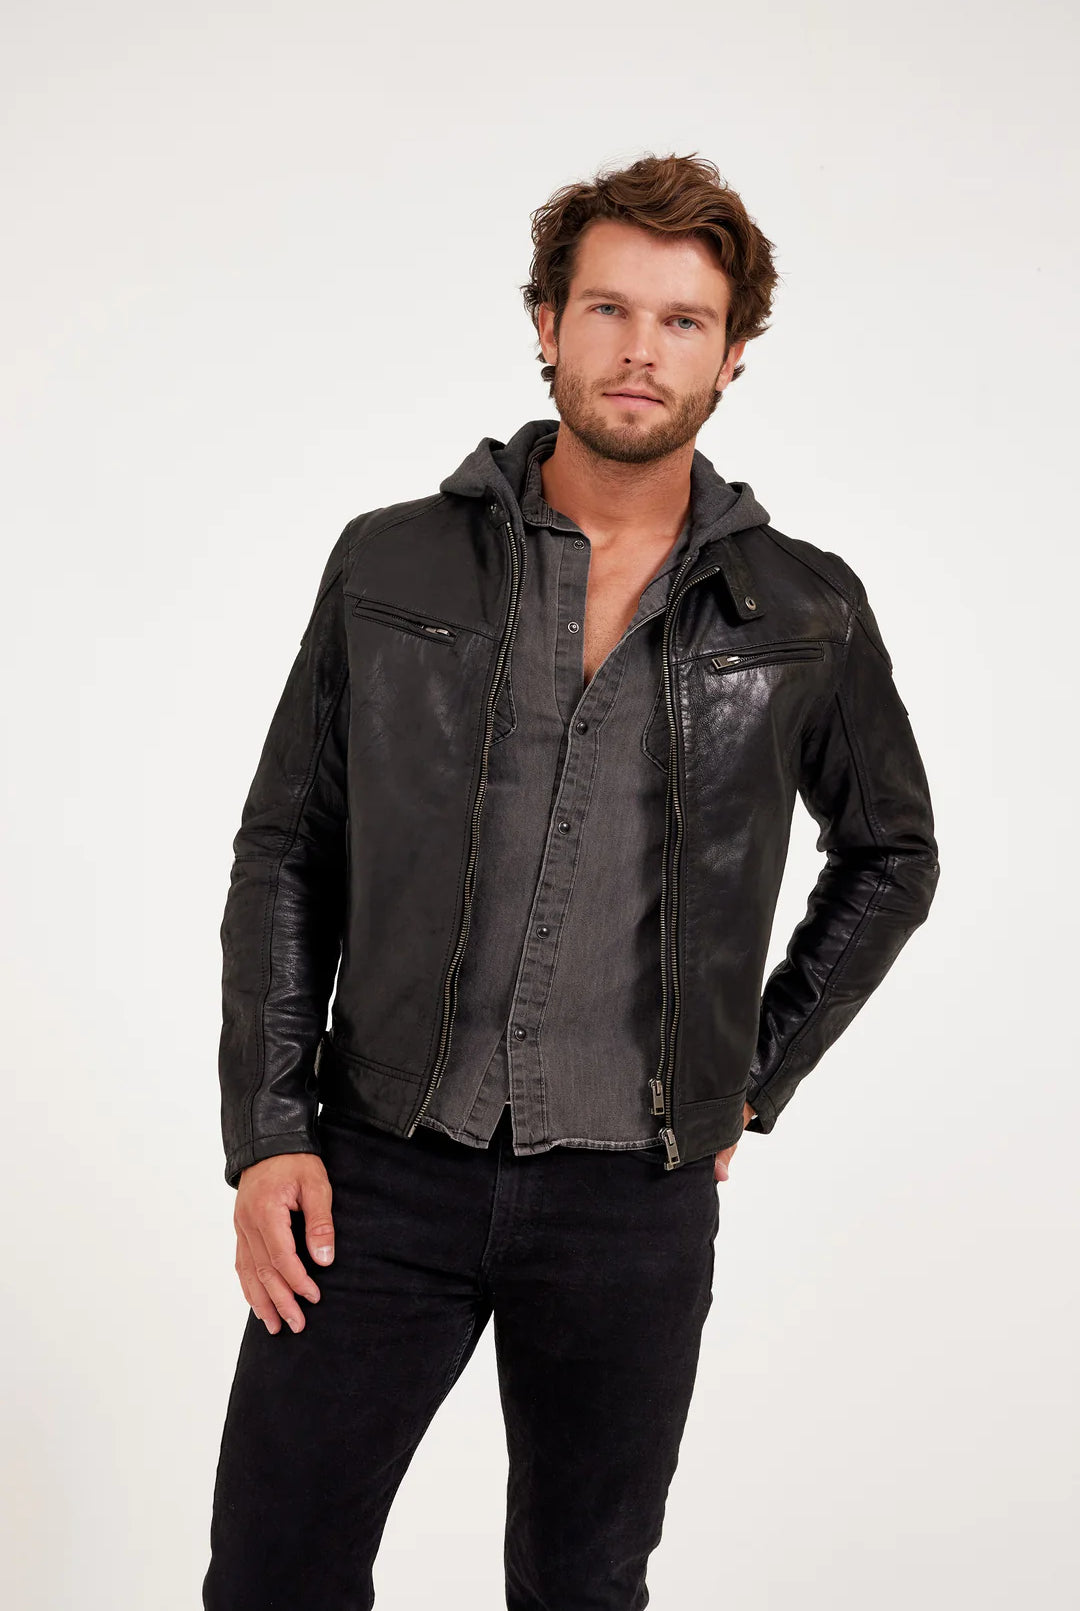 MAURITIUS BLACK LEATHER JACKET WITH ZIPOUT INSERT AND HOOD